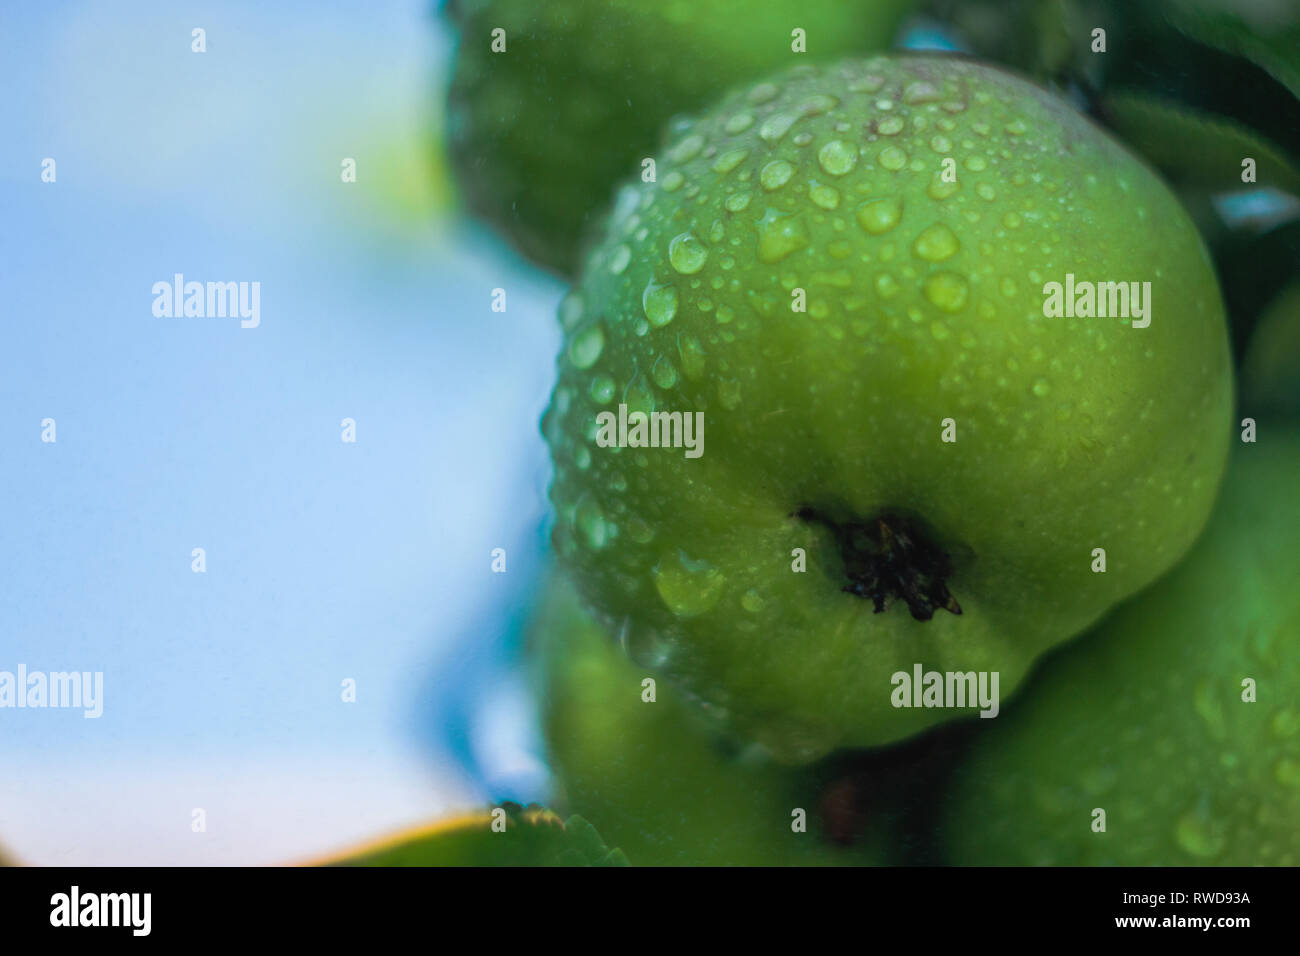 Water drops on fresh green apple on blurred background closeup photography Stock Photo